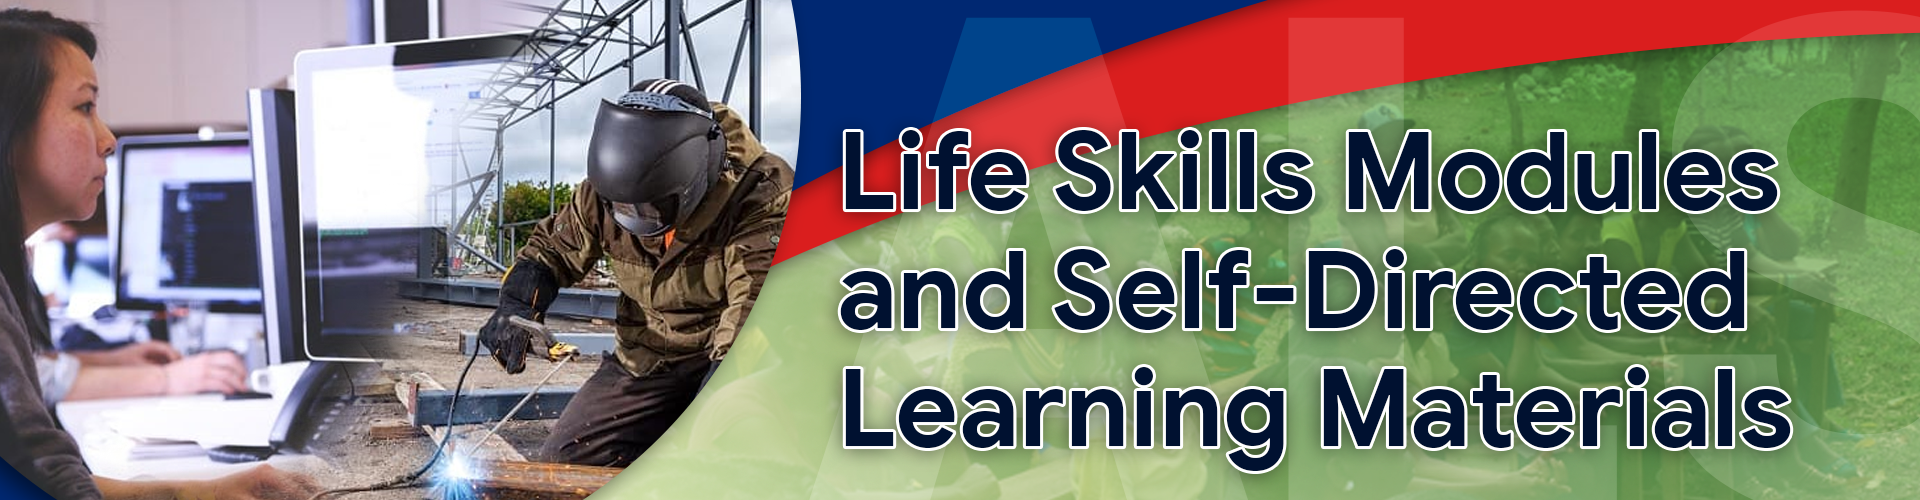 A&E Life-Skills & Self-Directed Learning Materials